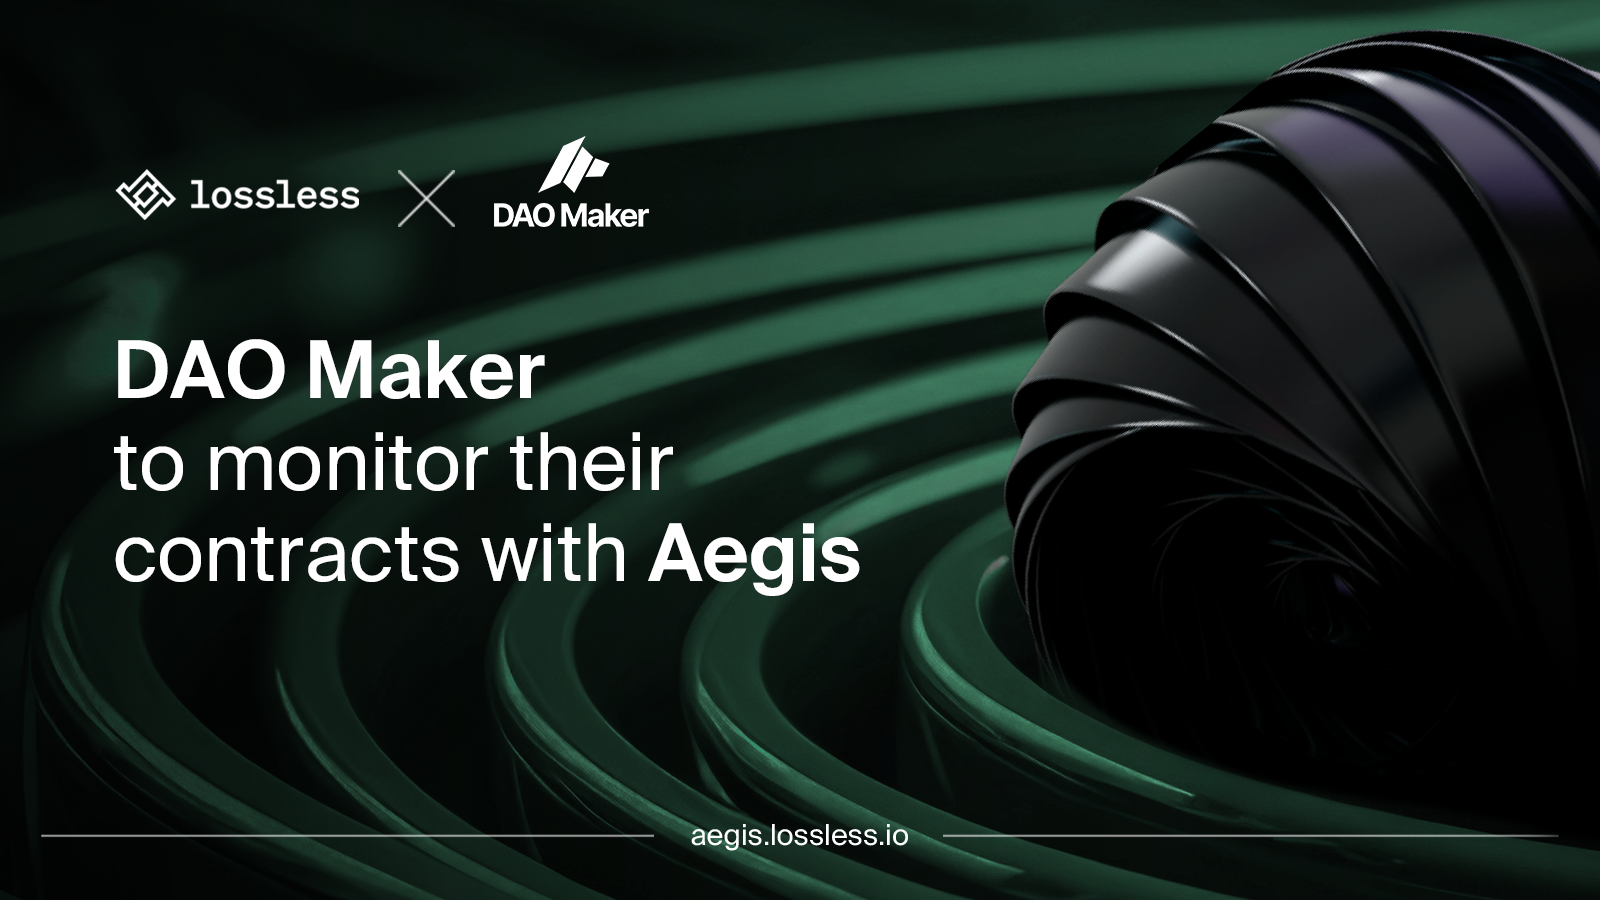 DAO Maker to apply Aegis smart contract monitoring